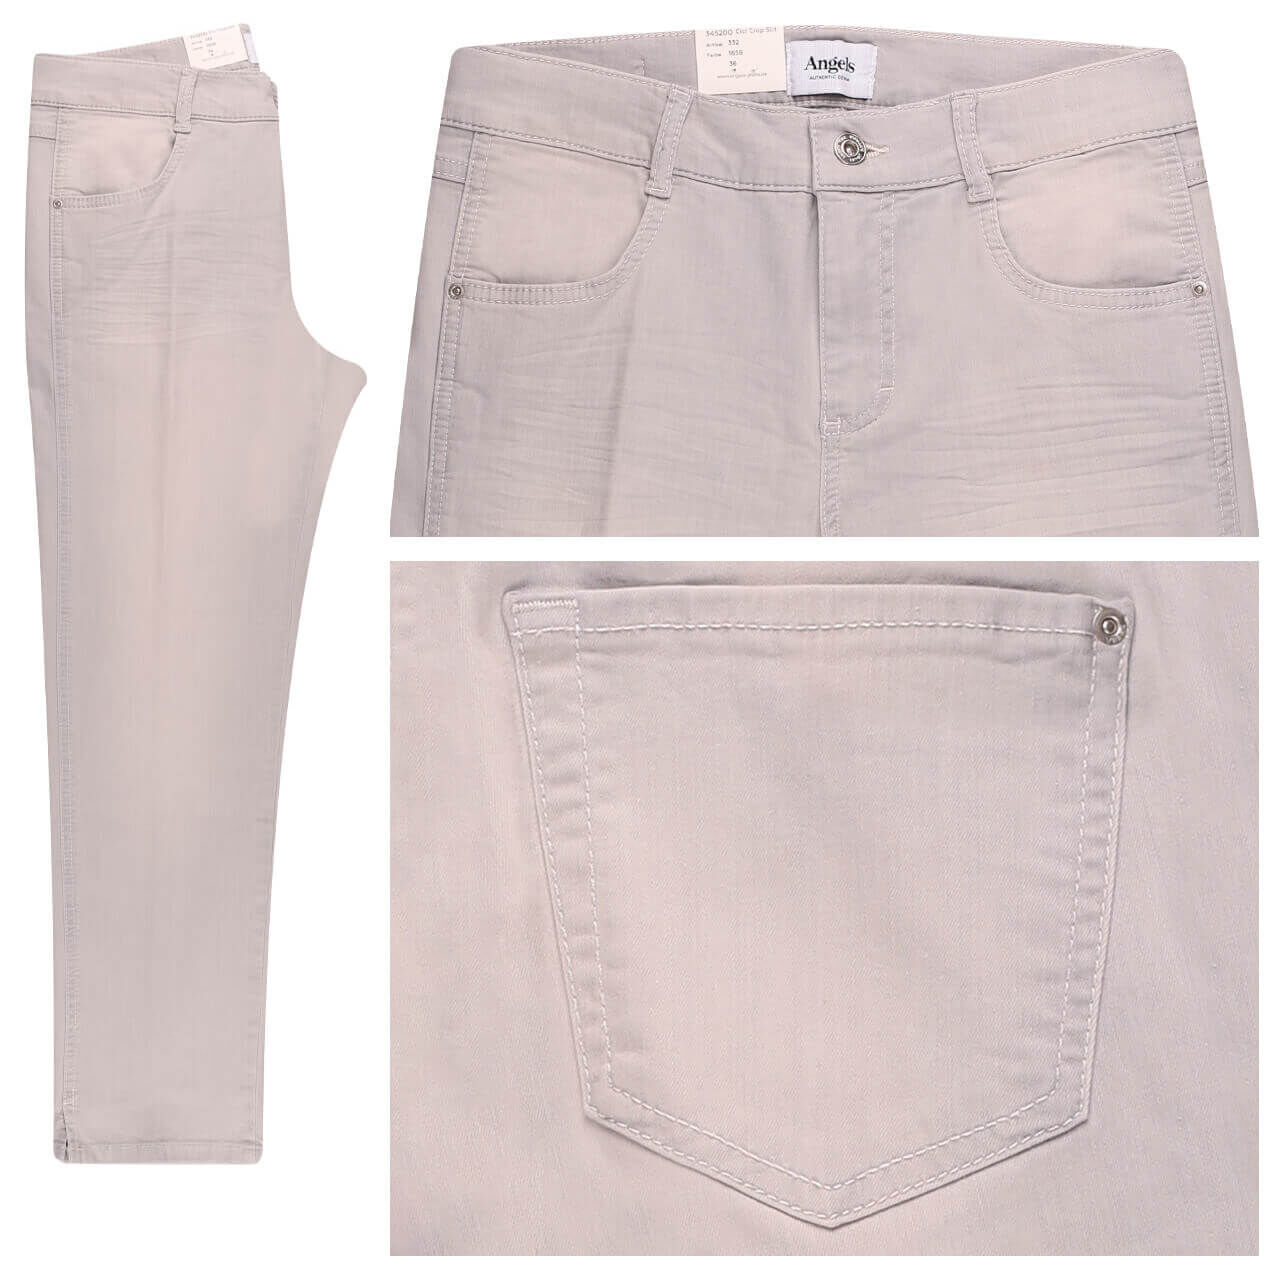 Angels Cici Crop 7/8 Jeans light grey used